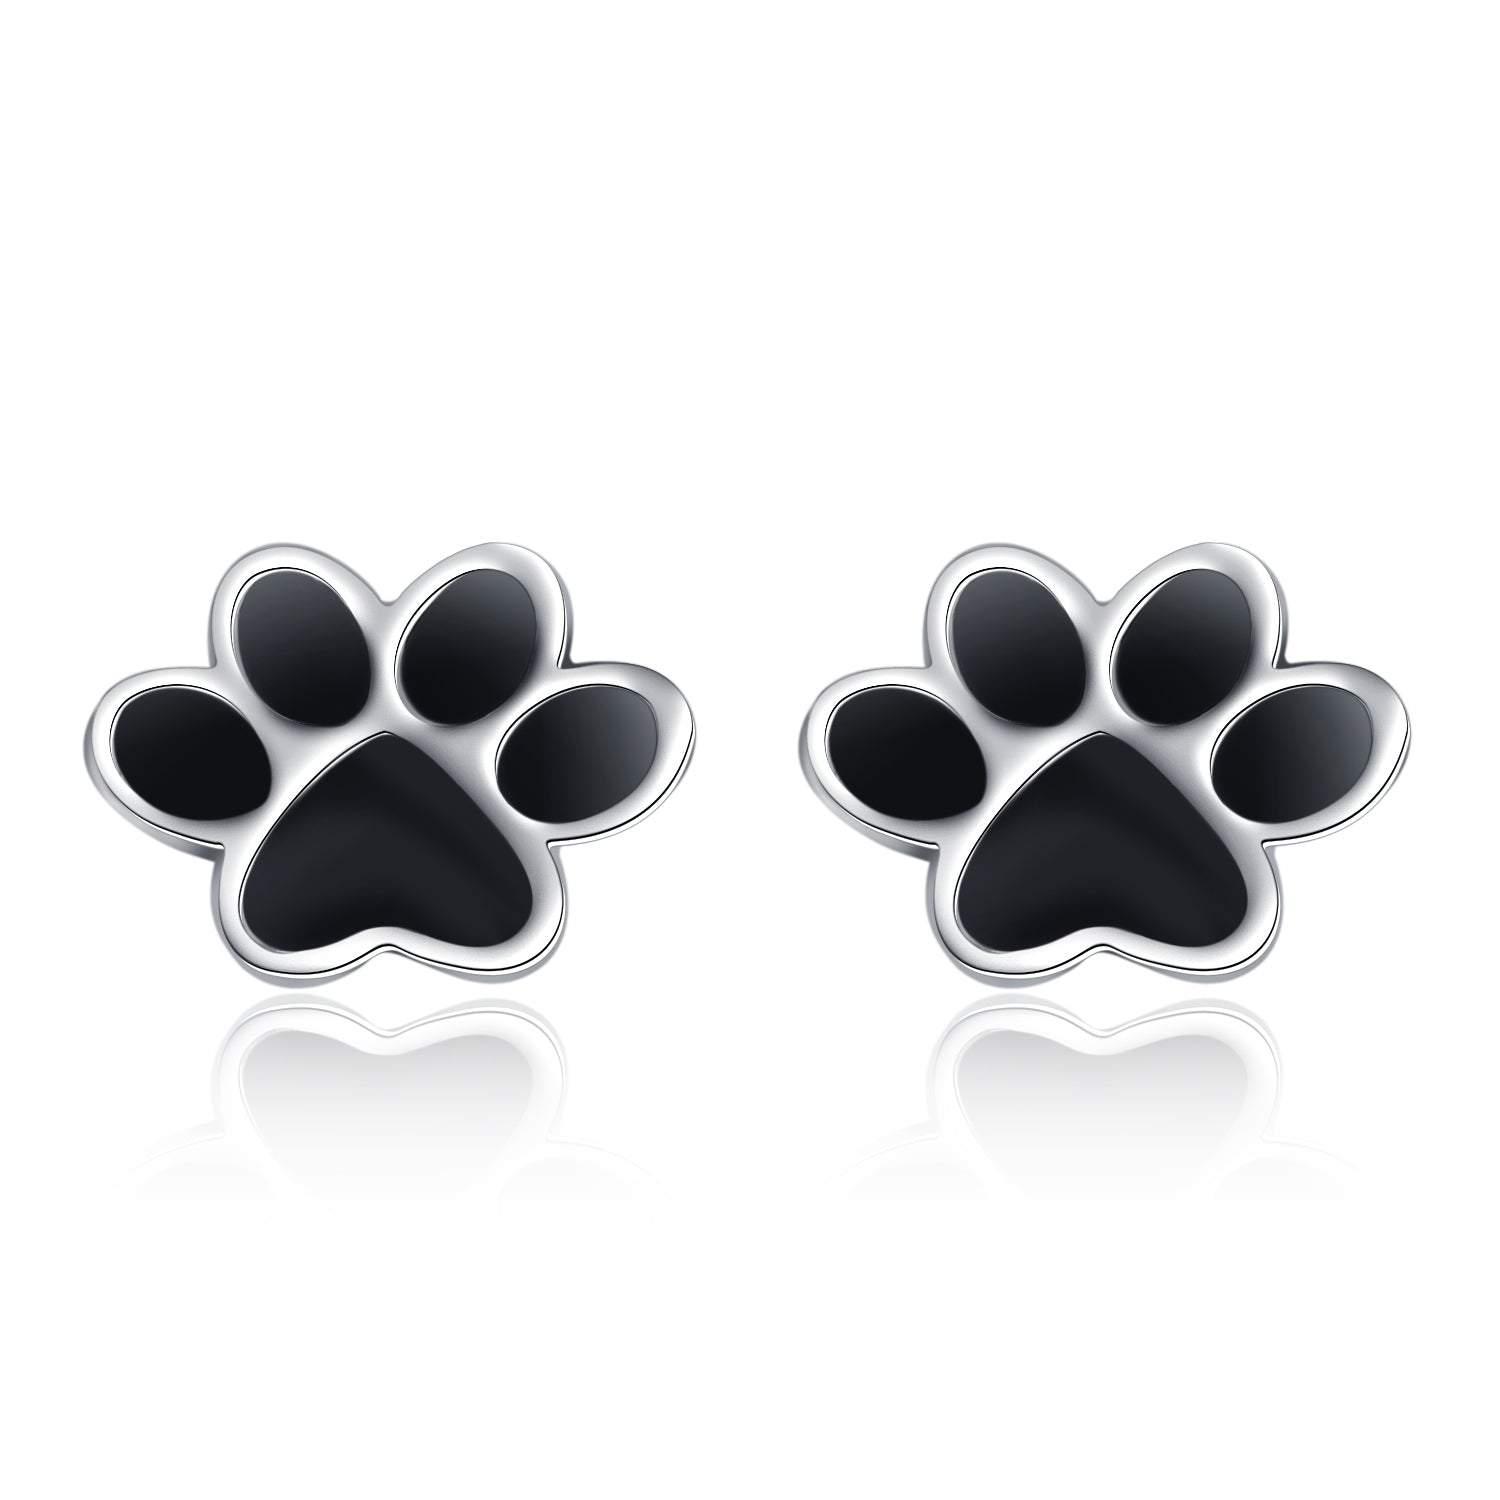 Dog Claw Earring Black Paw Silver Design Wholesale Best Quality